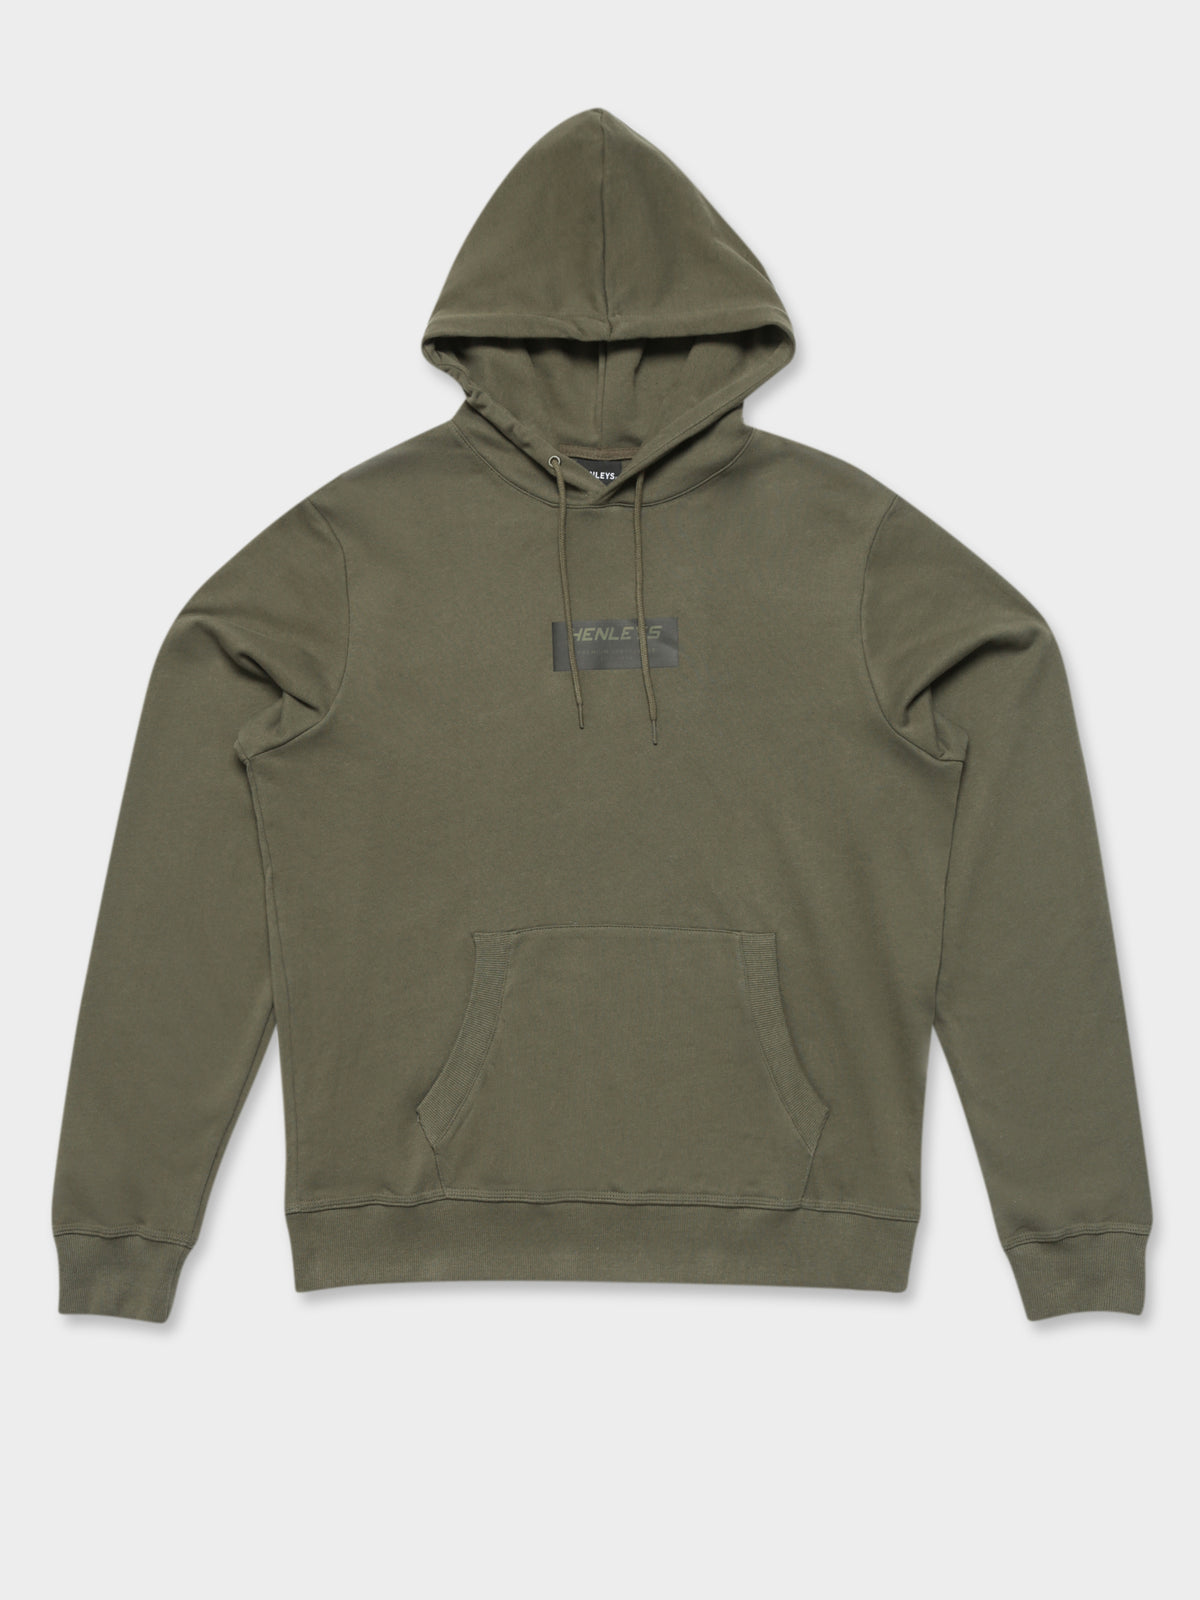 Quiver Hooded Sweater in Army